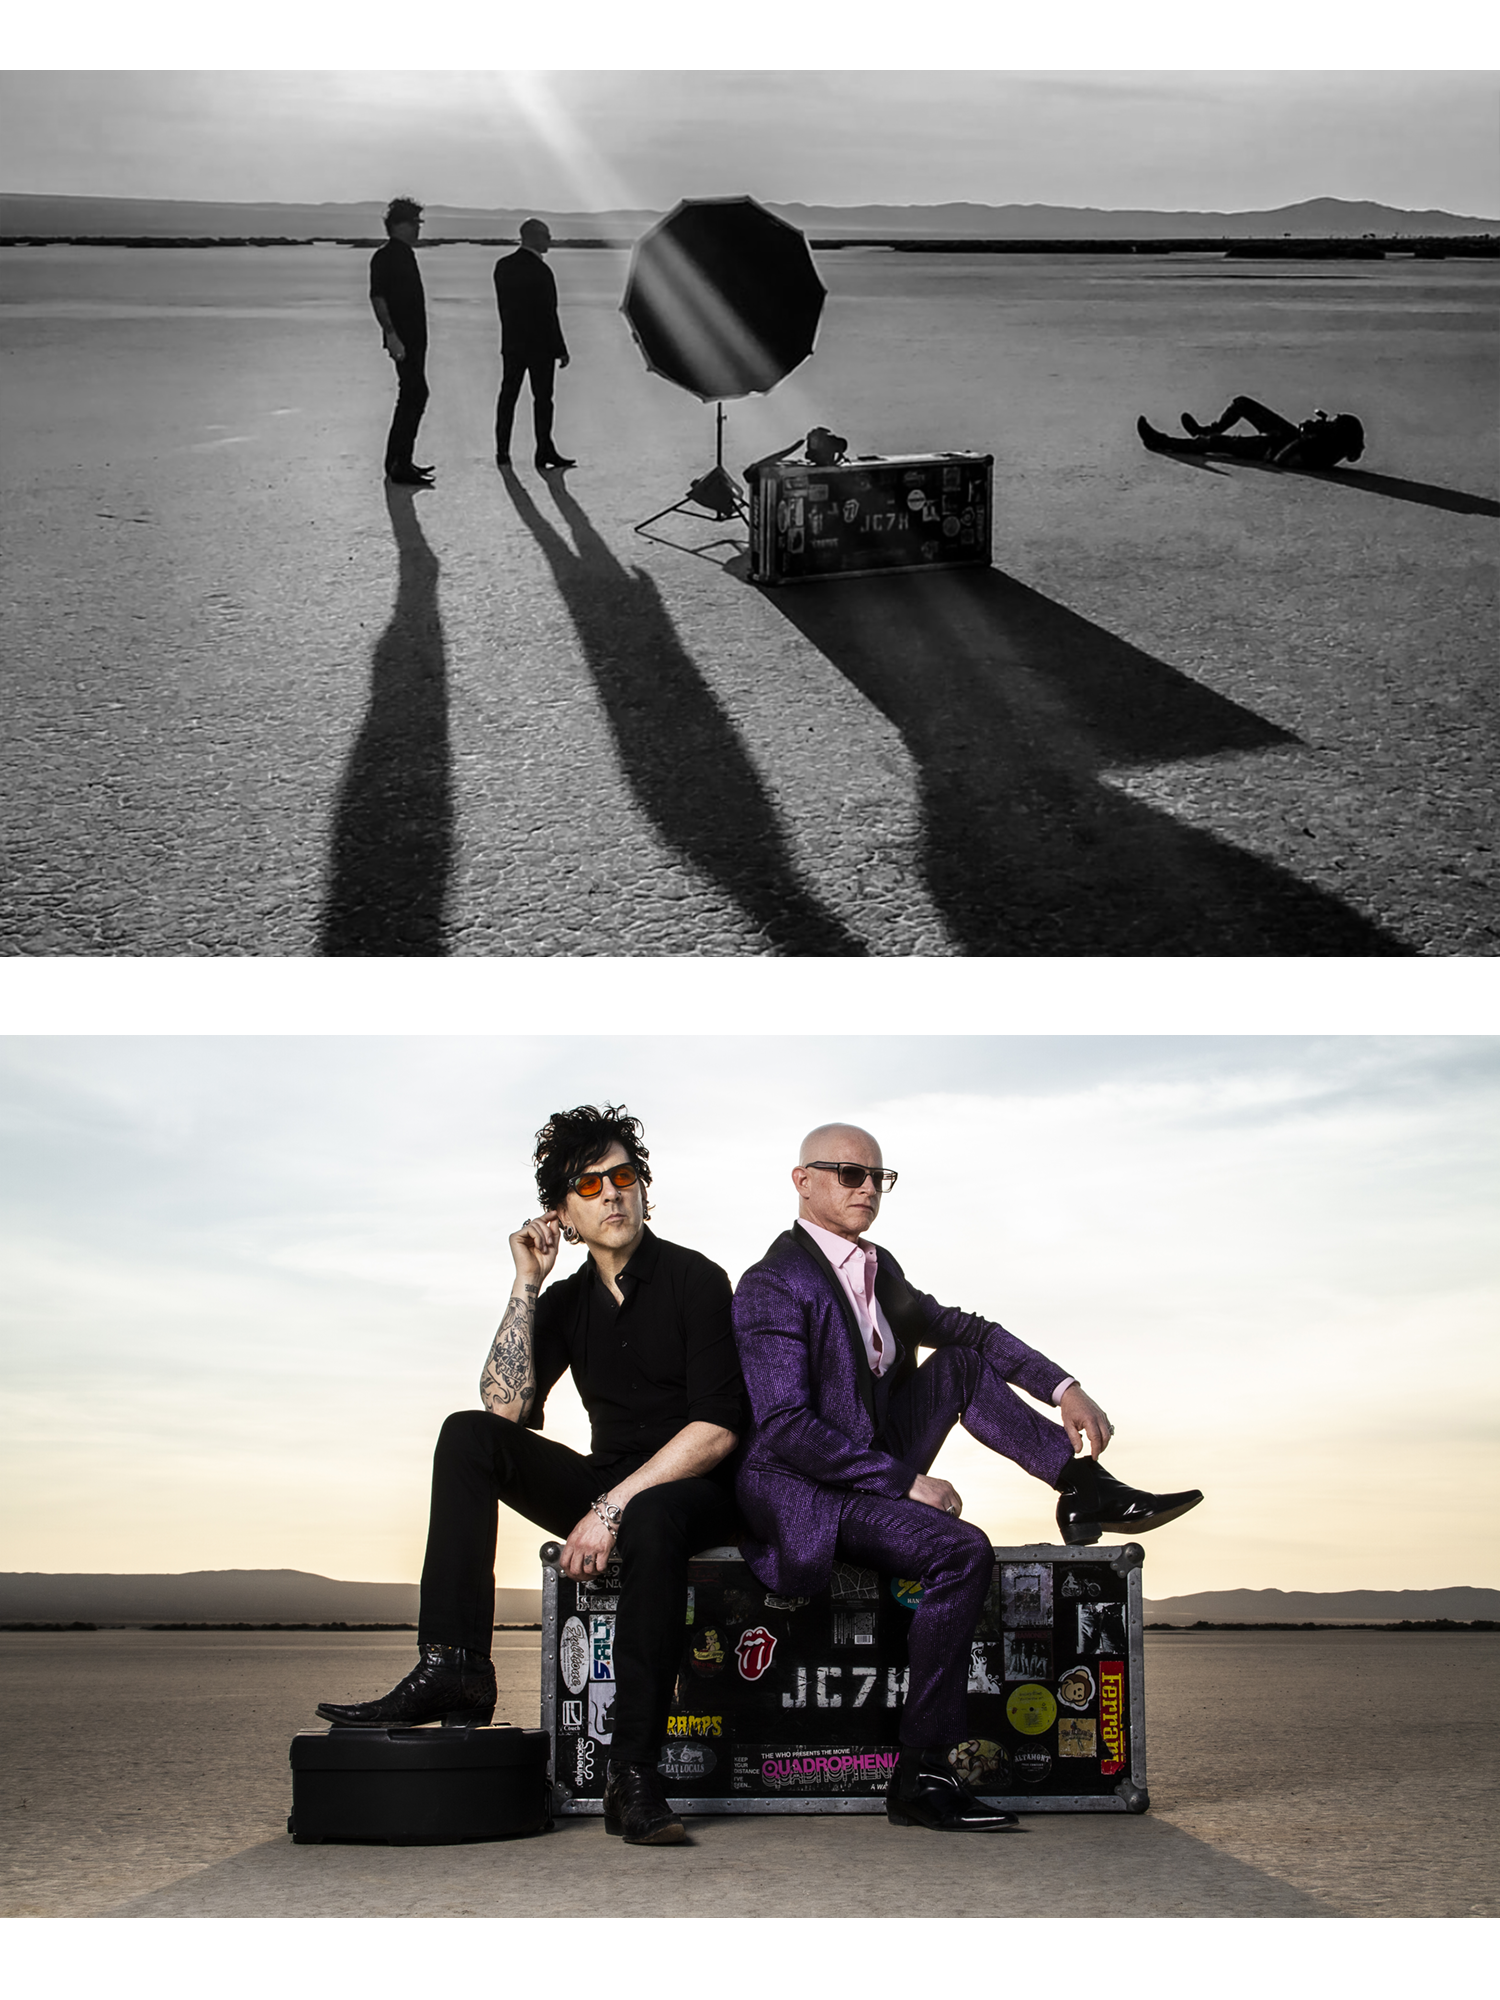 Fine art portrait photography shoot 7Horse duo in desert sitting on guitar case in color black and white behind the scenes photo with Mark Maryanovich placed above